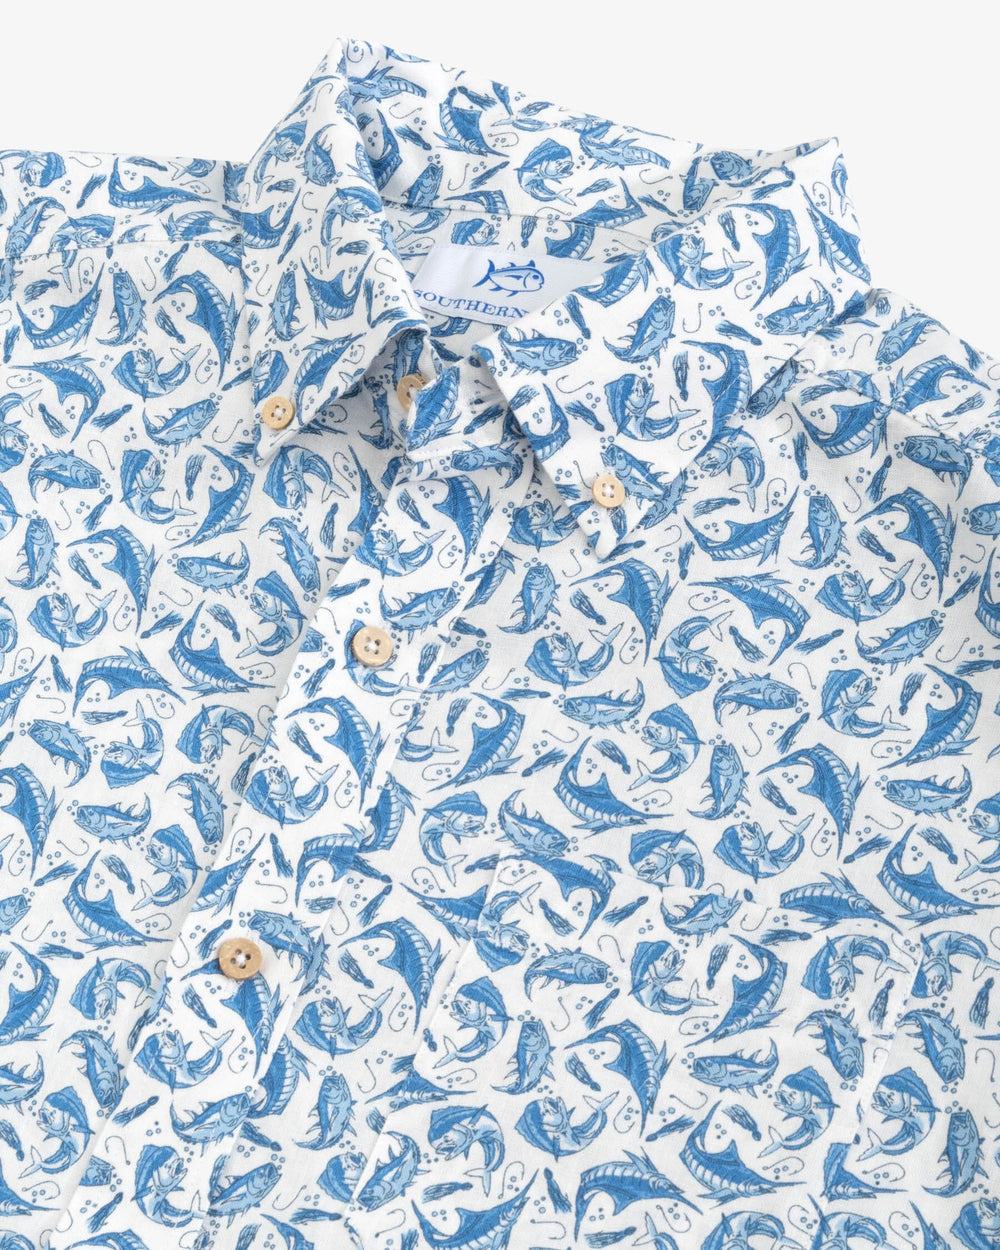 The detail view of the Southern Tide Catch You Later Short Sleeve Long Sleeve Button Down Sport Shirt by Southern Tide - Clearwater Blue